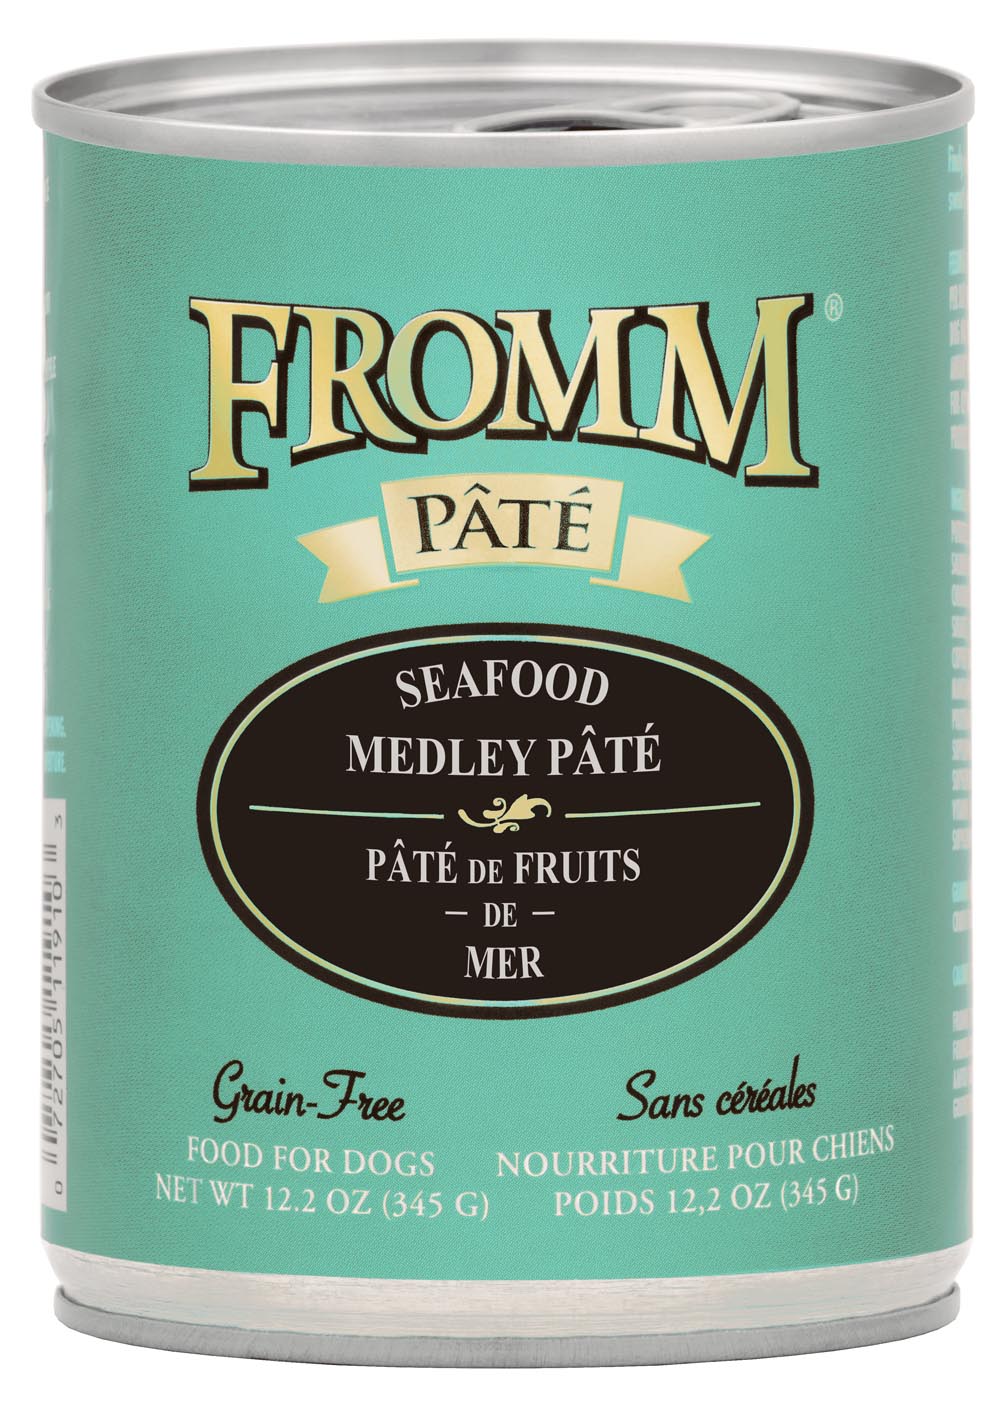 Fromm Seafood Medley Pate Food for Dogs, 12.2 oz